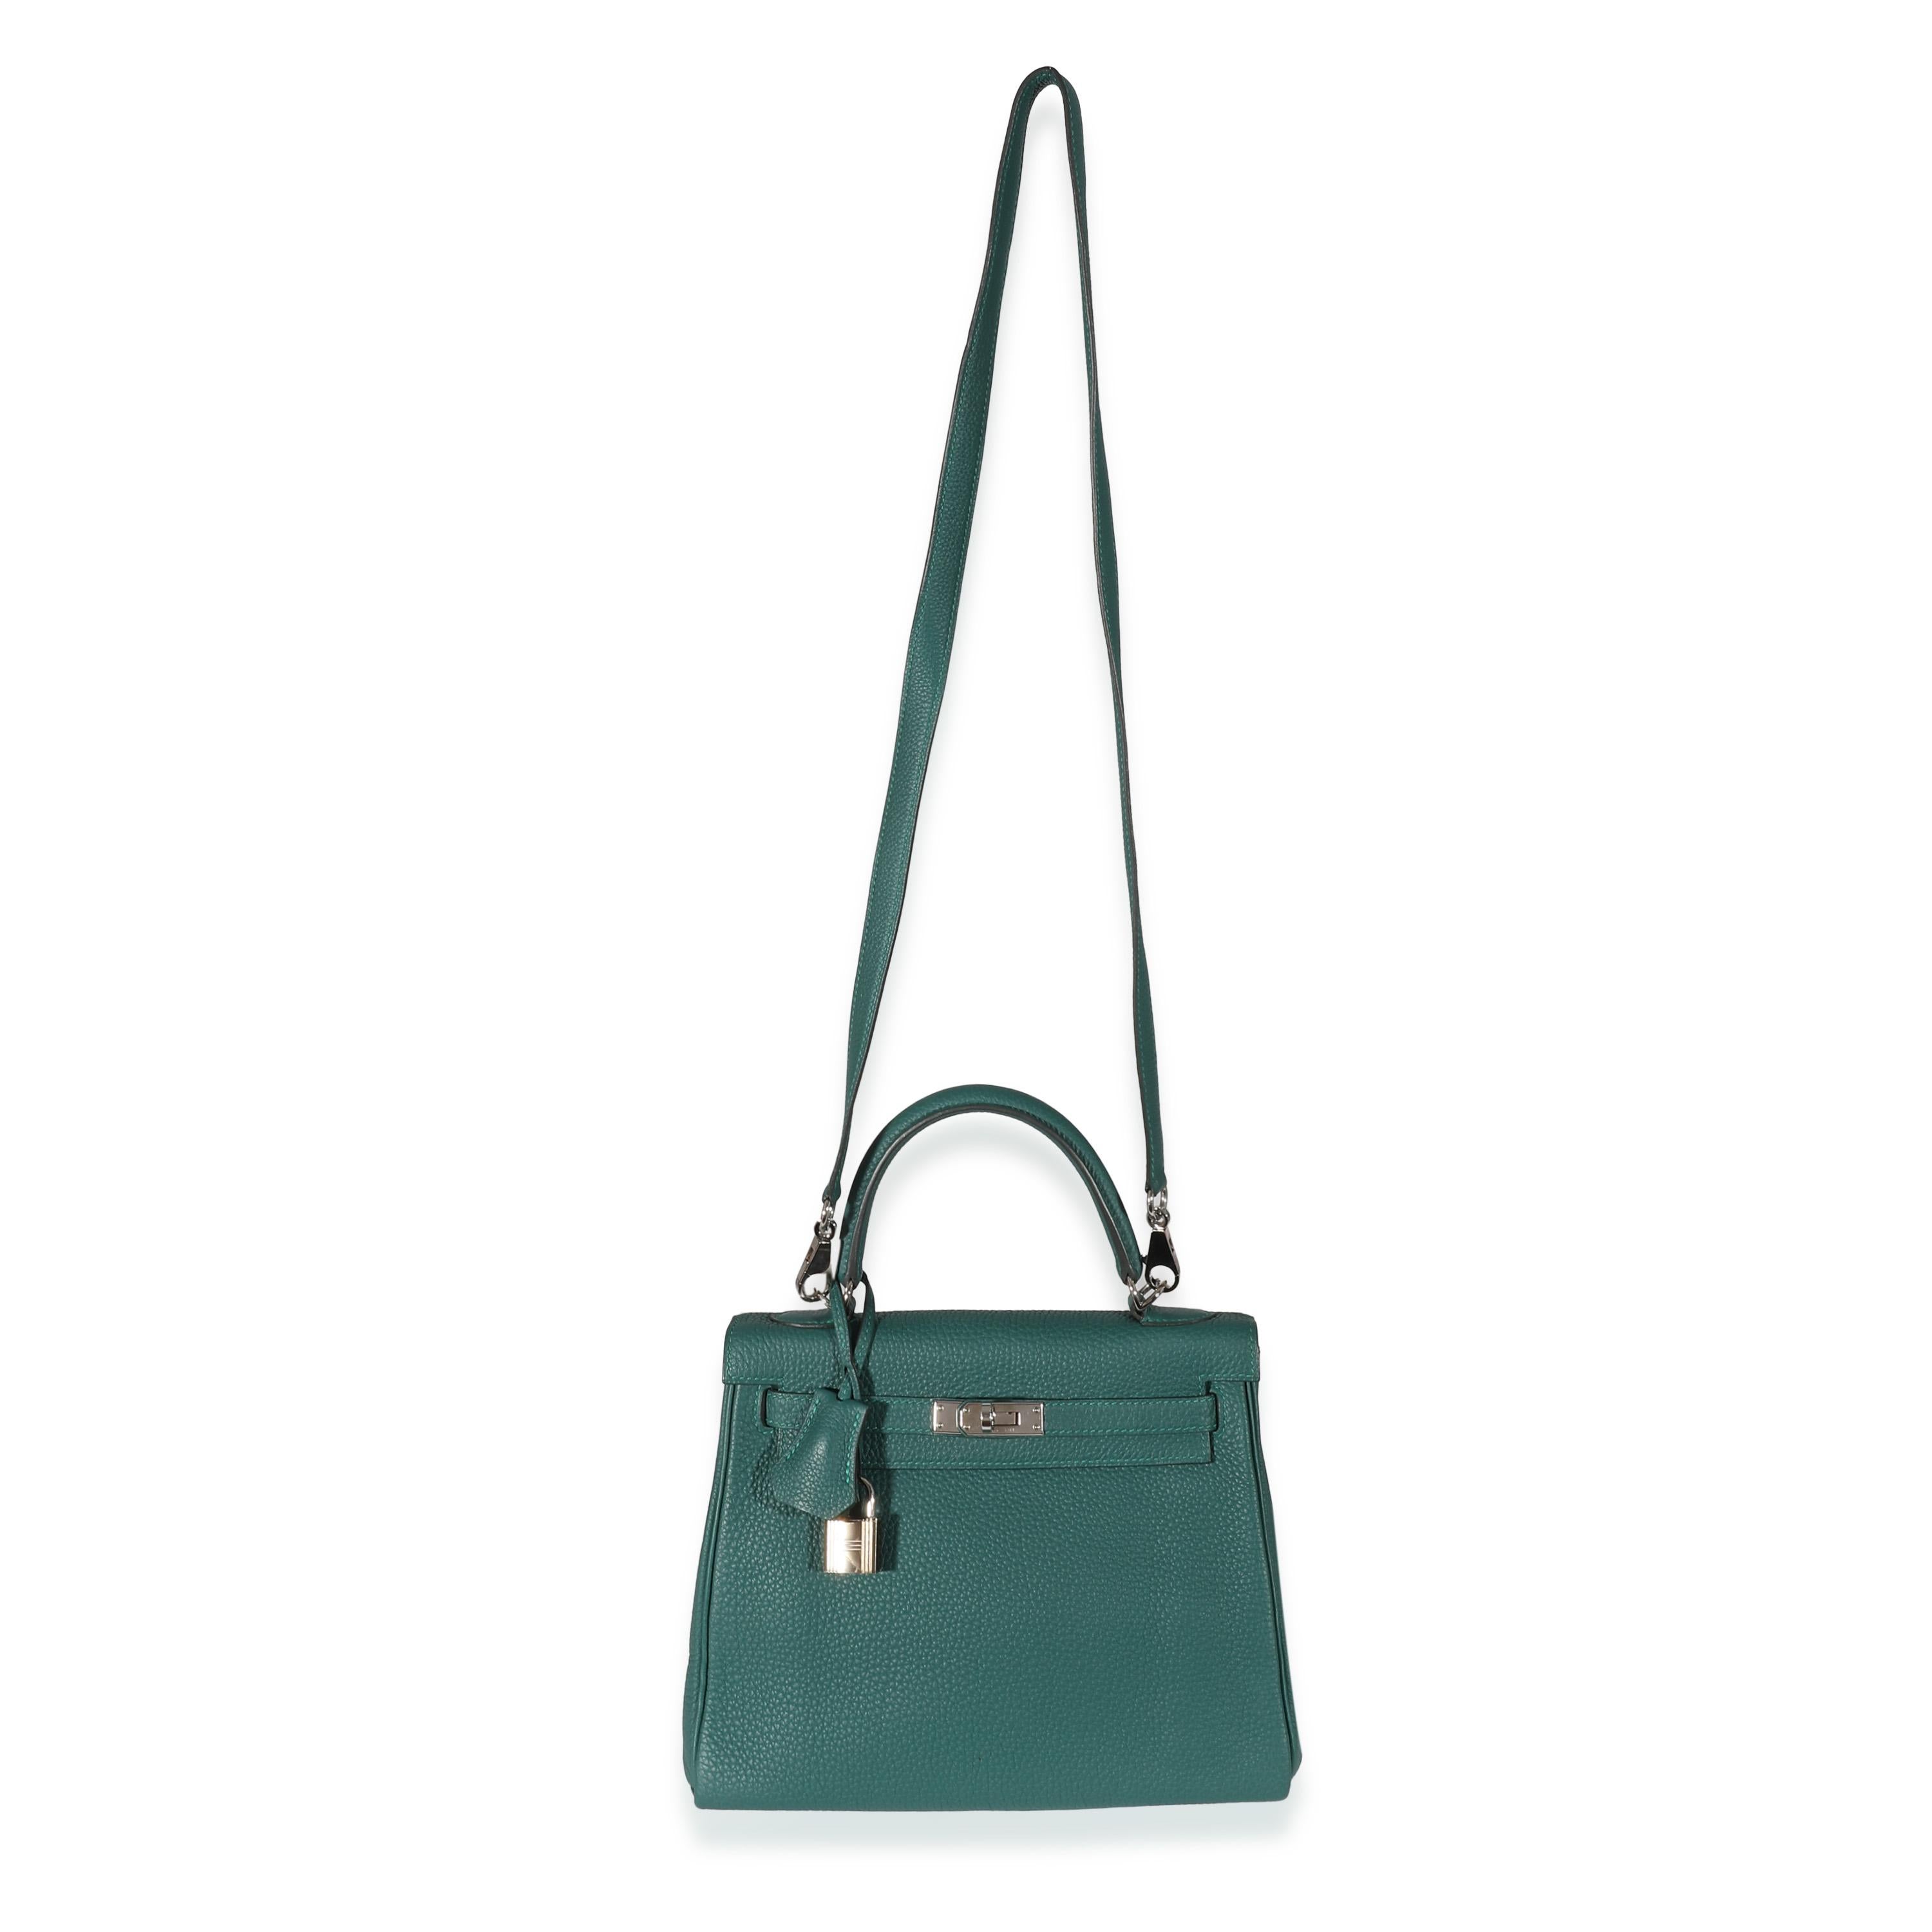 Listing Title: Hermes Malachite Togo Retourne Kelly 25 PHW
SKU: 133900
Condition: Pre-owned 
Handbag Condition: Excellent
Condition Comments: Item is in excellent condition and displays light signs of wear. Faint exterior corner scuffing. Scratching